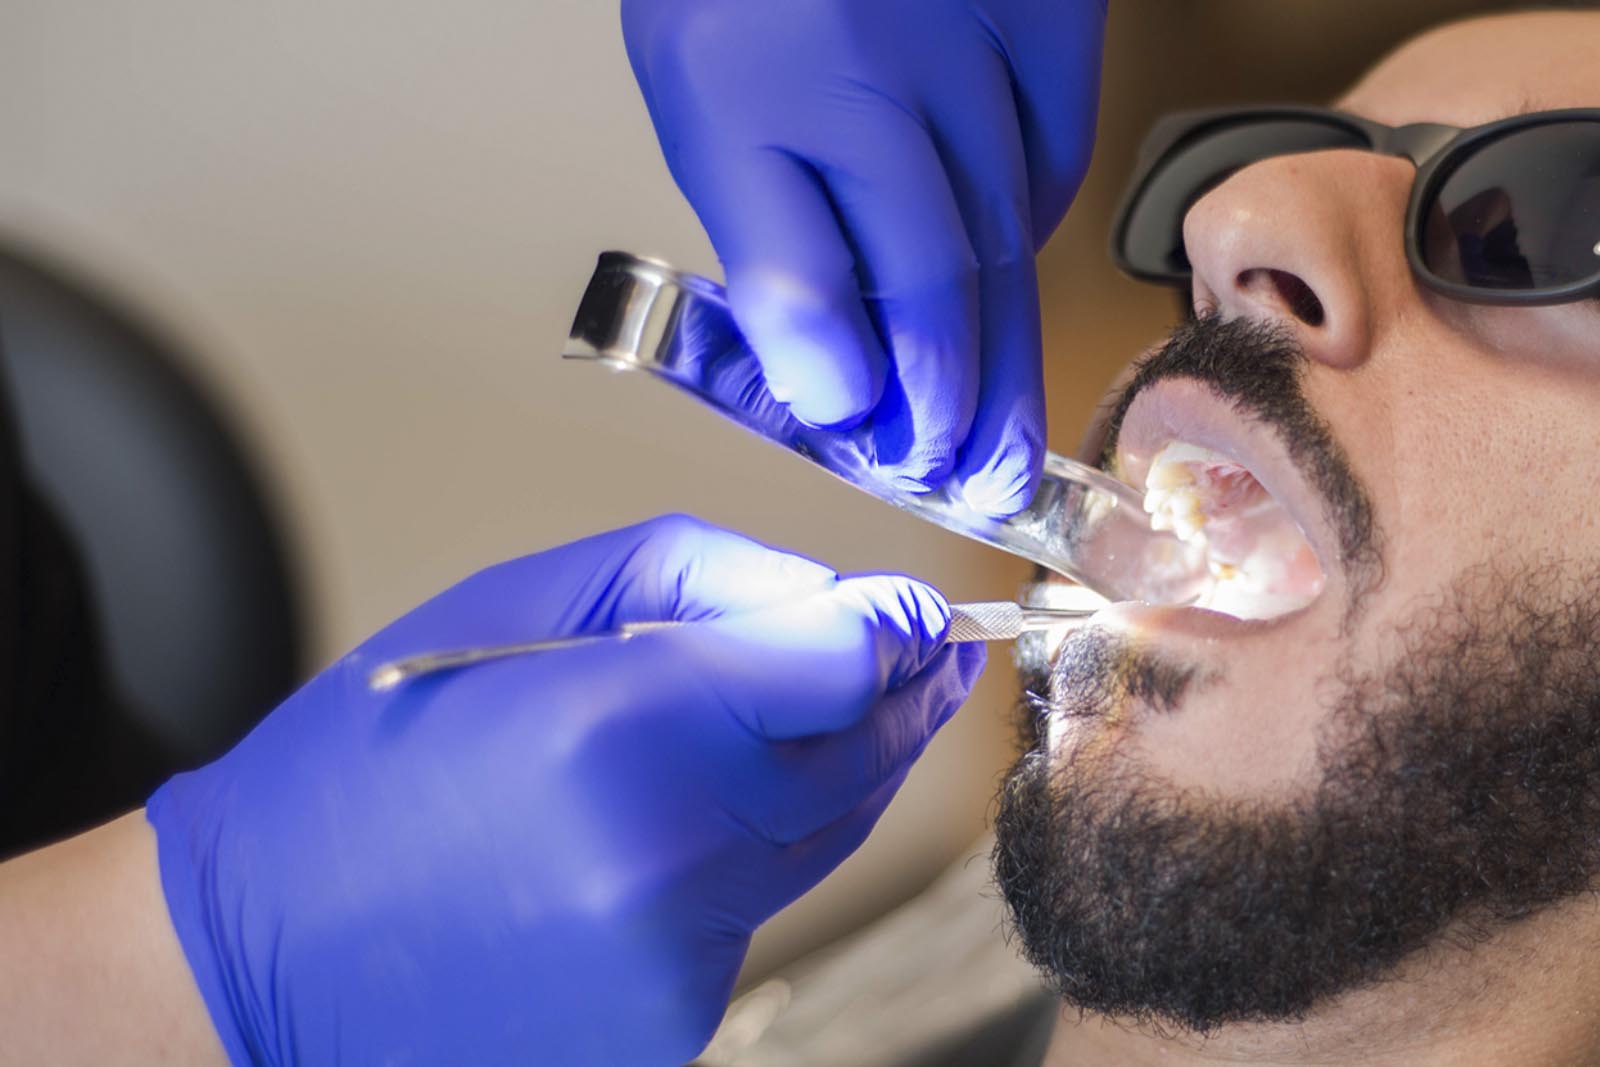 Why Is Root Canal Treatment More Preferable To Both Dentists And Patients? - ezequielvince